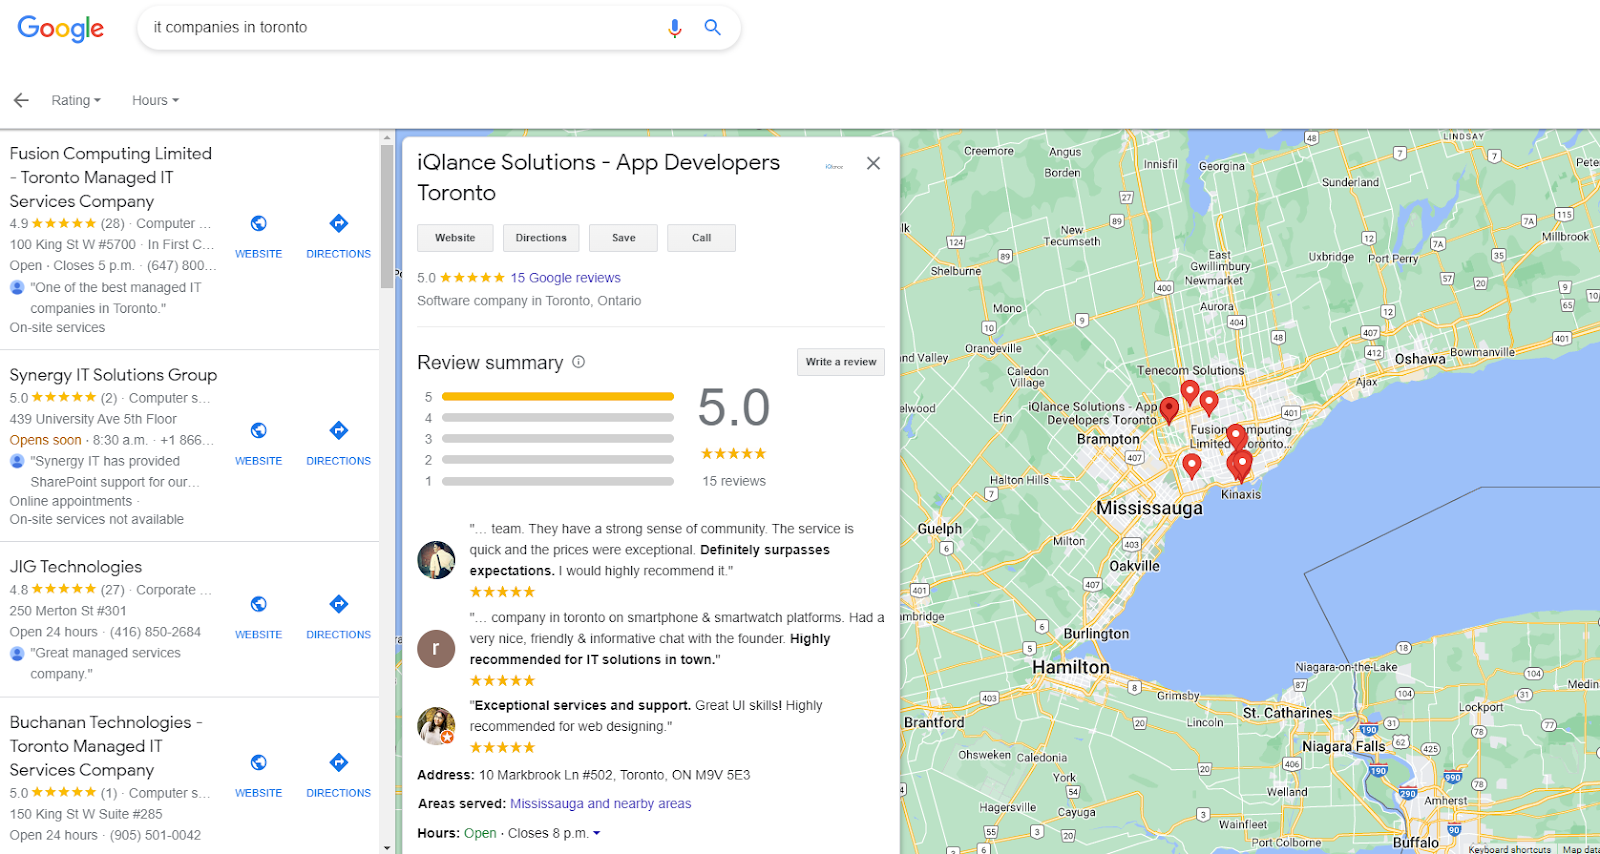 google maps search results for it companies in toronto